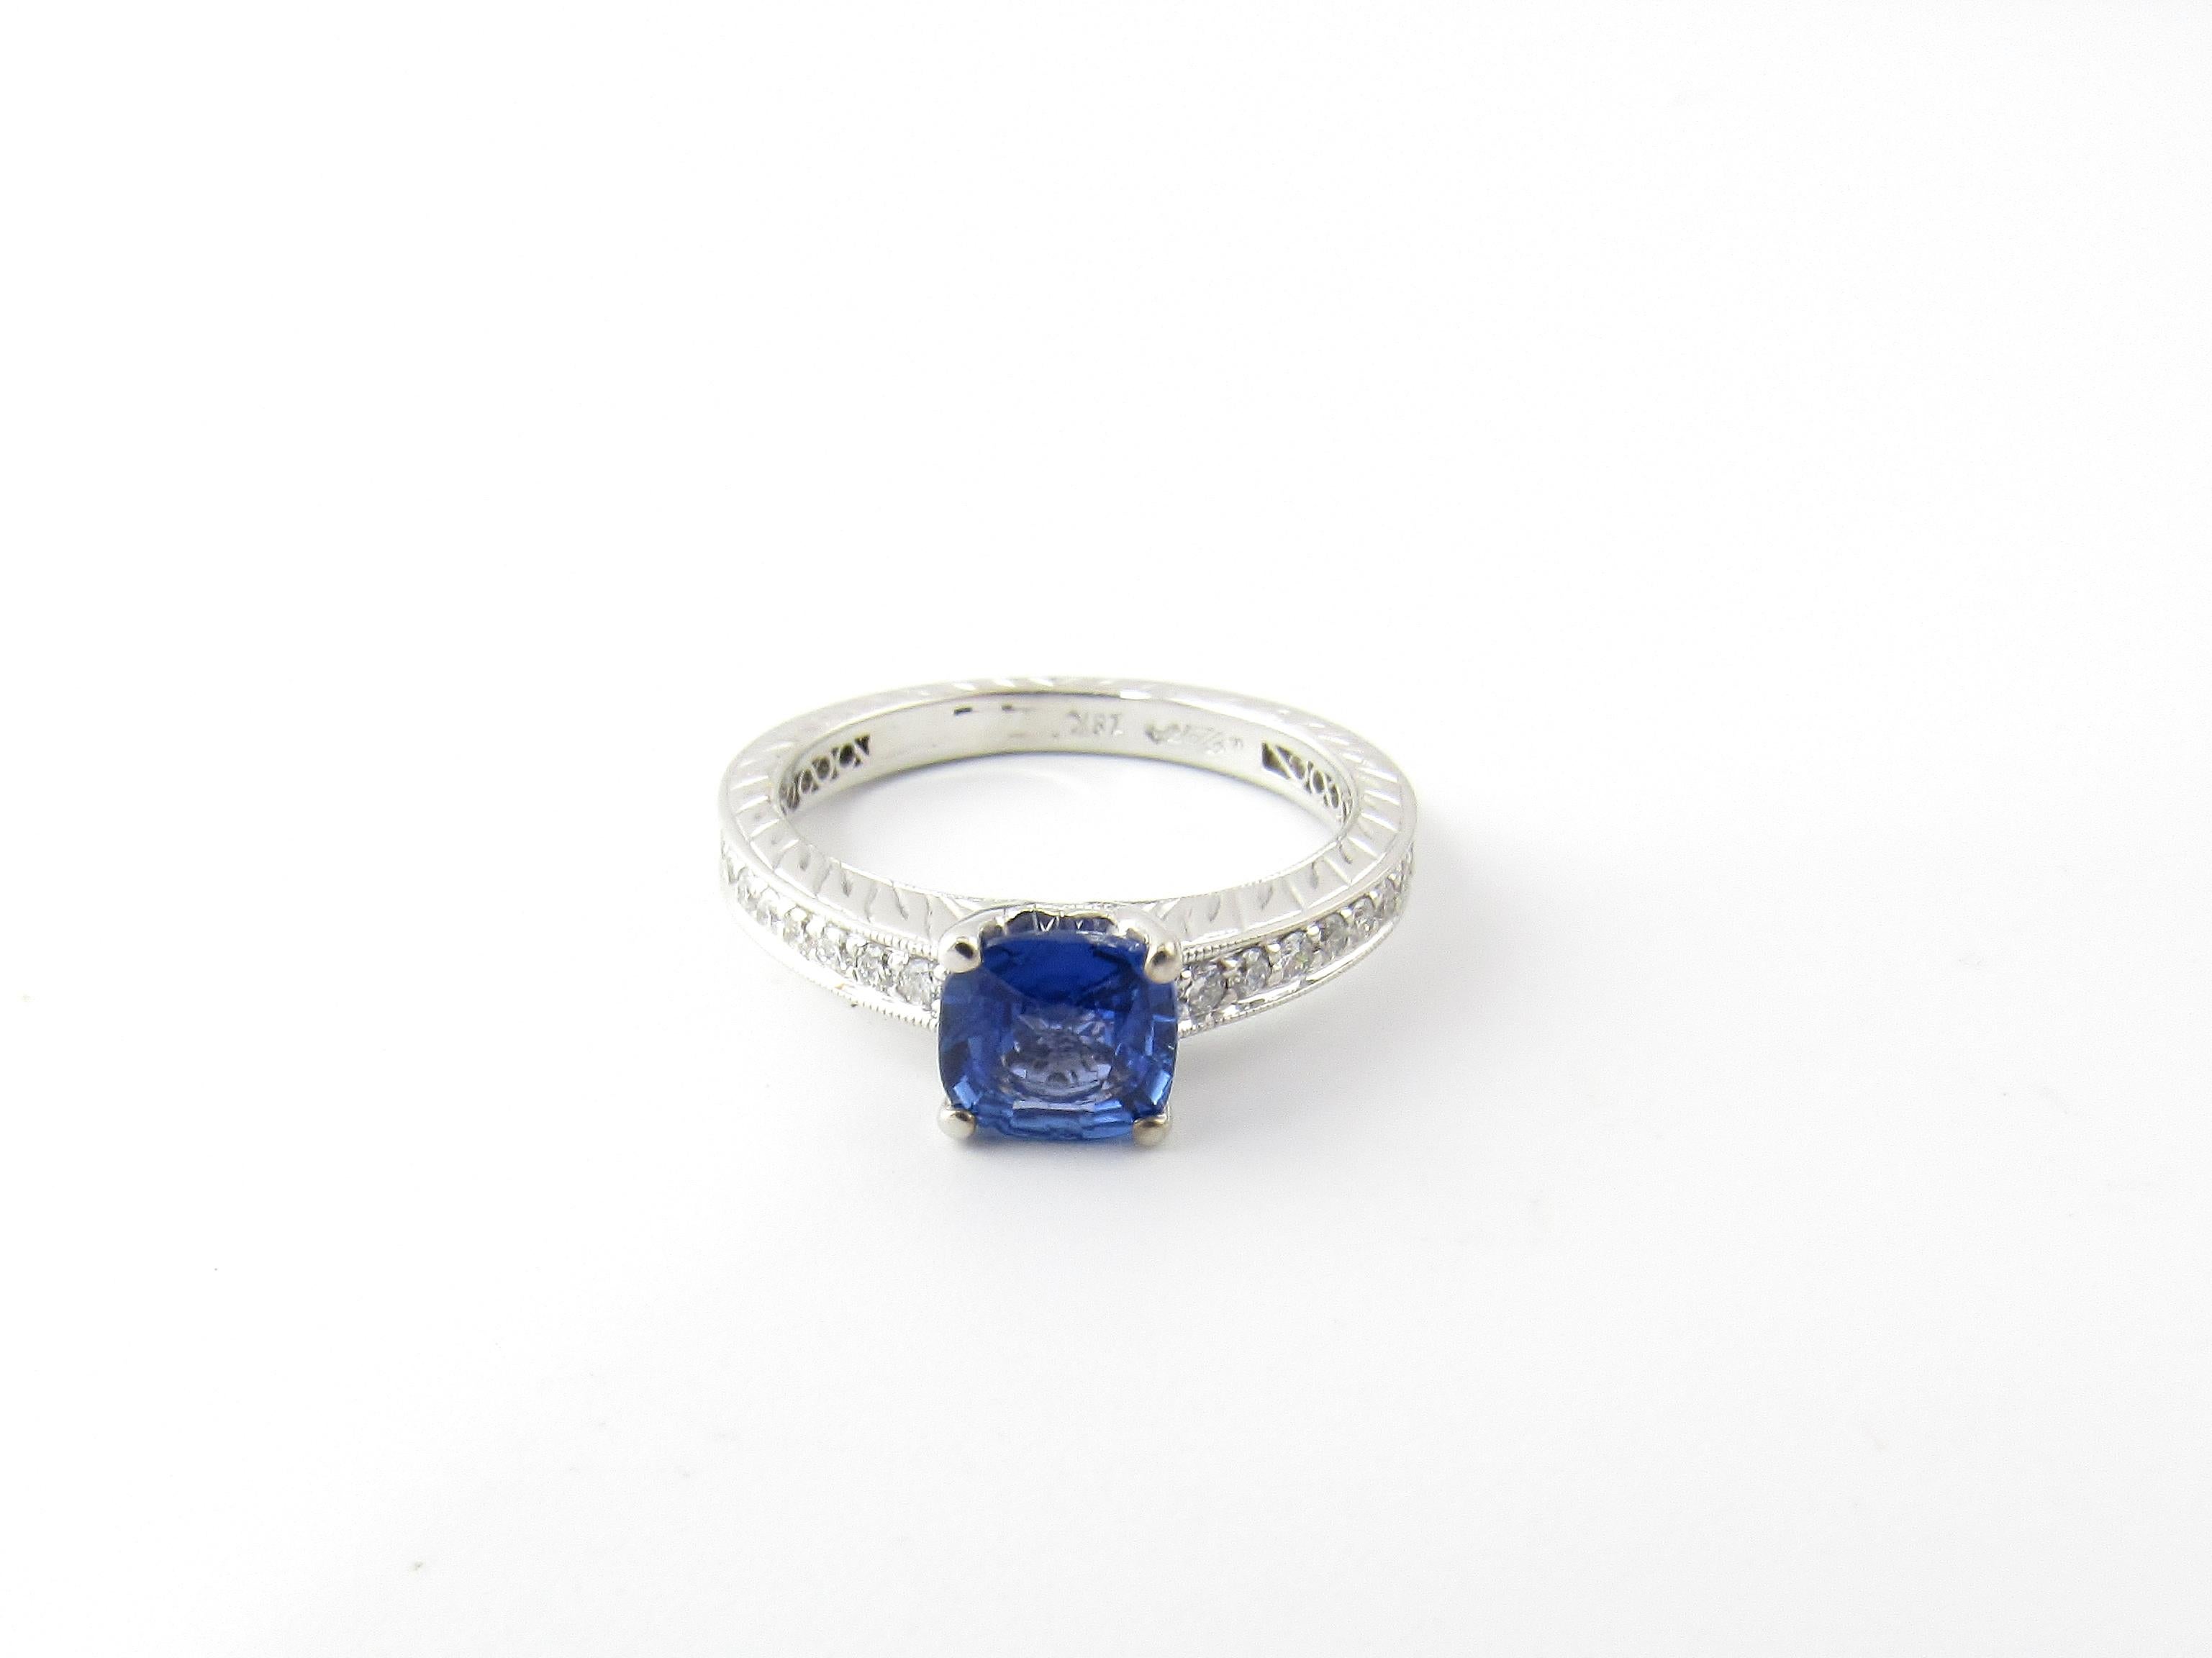 GAI Certified 18 Karat White Gold Genuine Tanzanite and Diamond Ring Size 6.25-

This stunning ring features one genuine tanzanite (6 mm x 6 mm) accented with 39 round brilliant cut diamonds set in beautifully detailed 18K white gold.  Shank